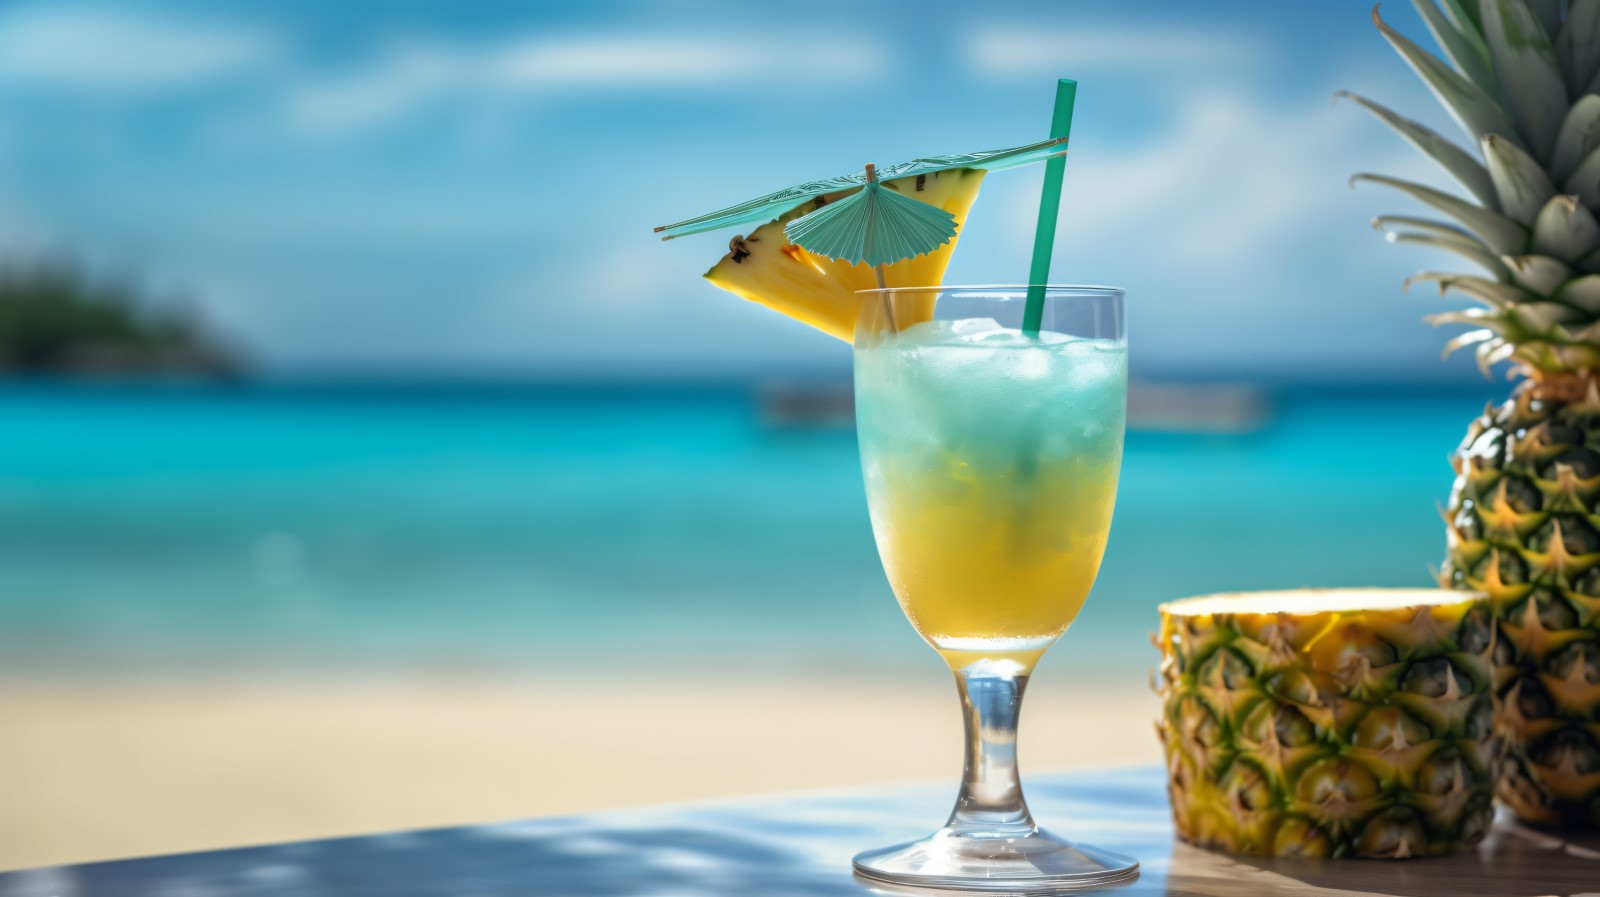 pineapple drink in cocktail glass and sand beach scene 126